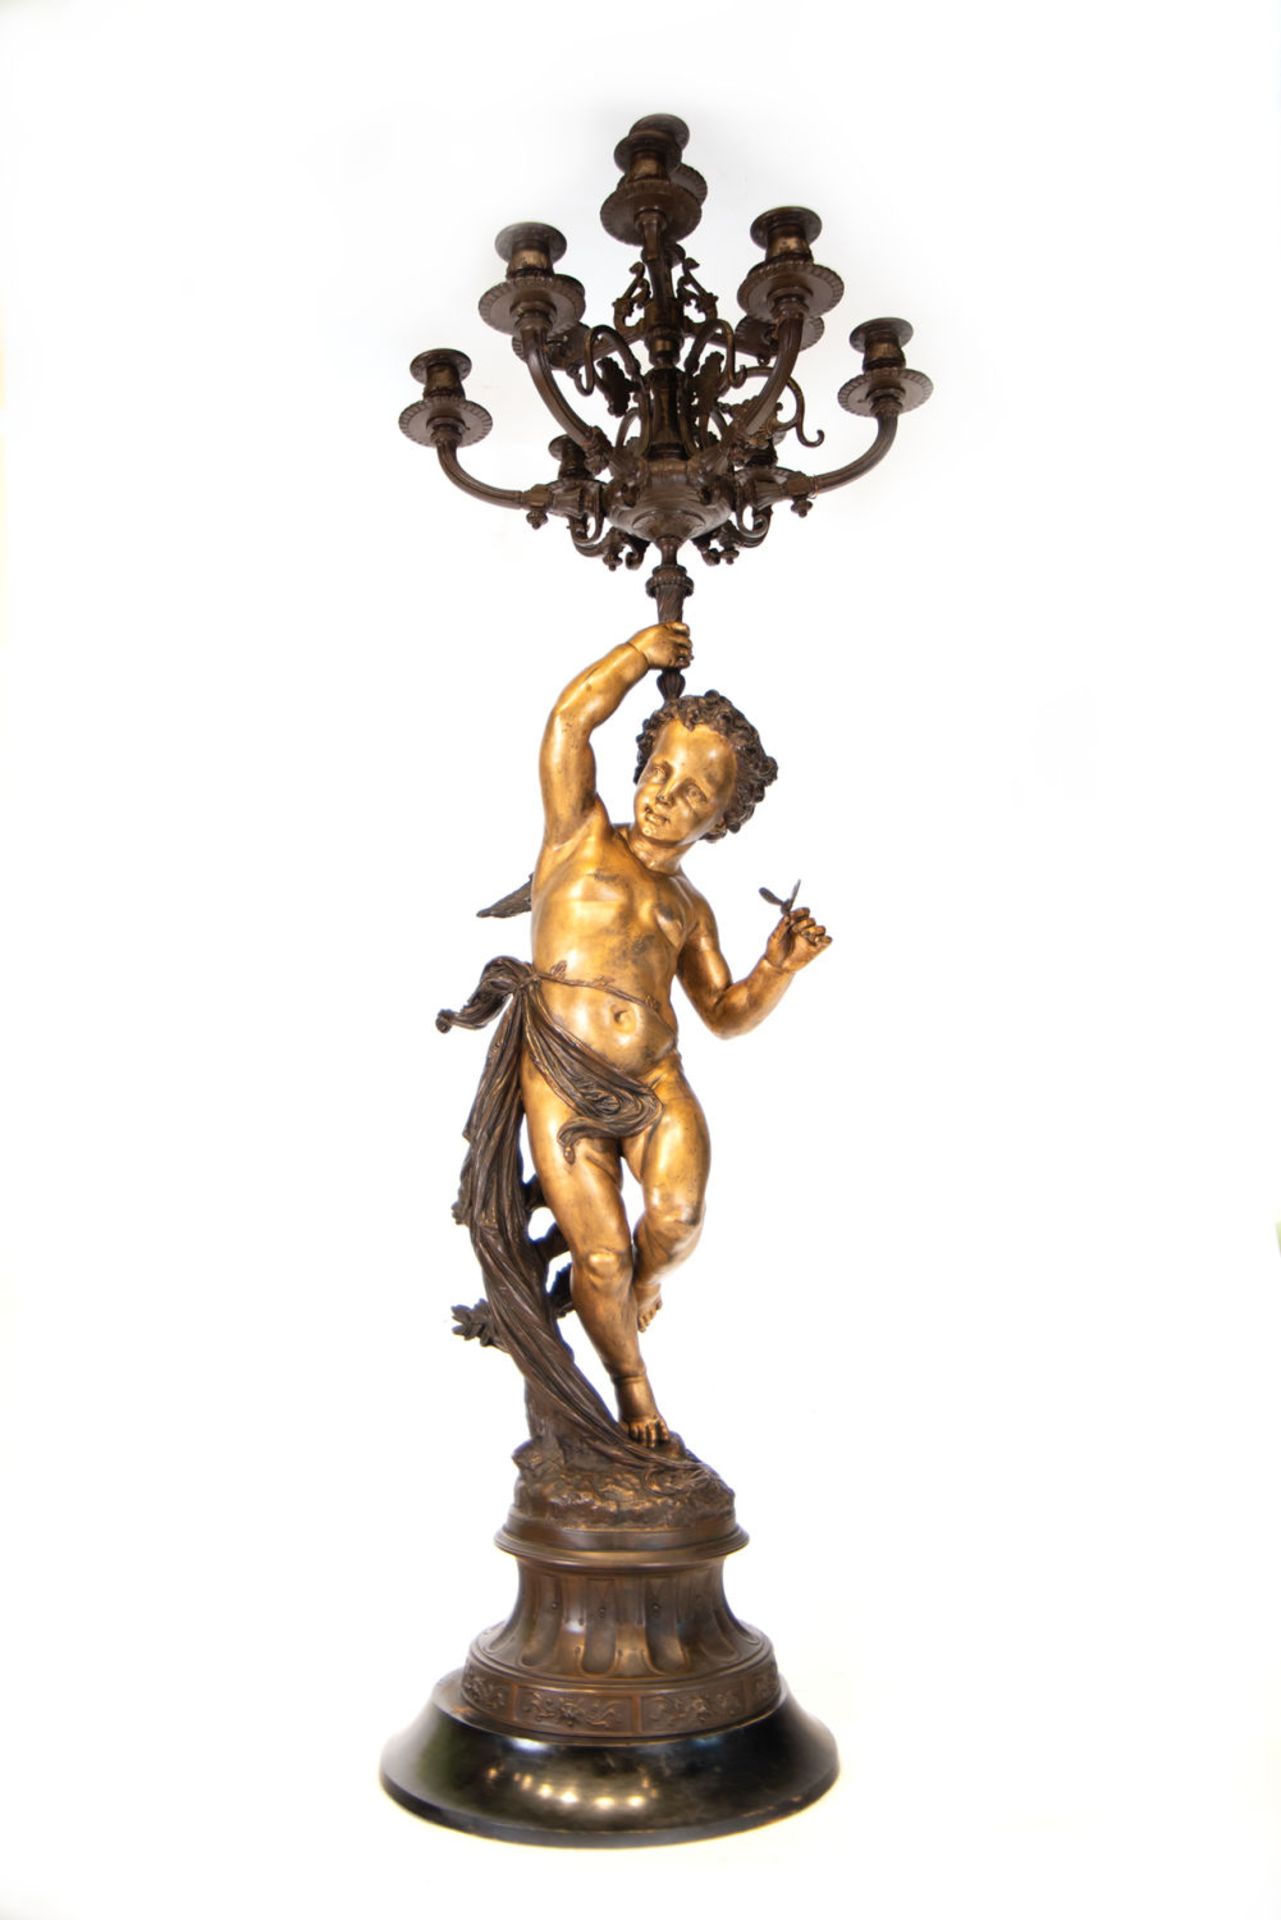 Massive Pair of French 19th Gilt Bronze Torcheres in the manner of Jean Baptiste Carpeaux NO RESERVE - Image 9 of 9